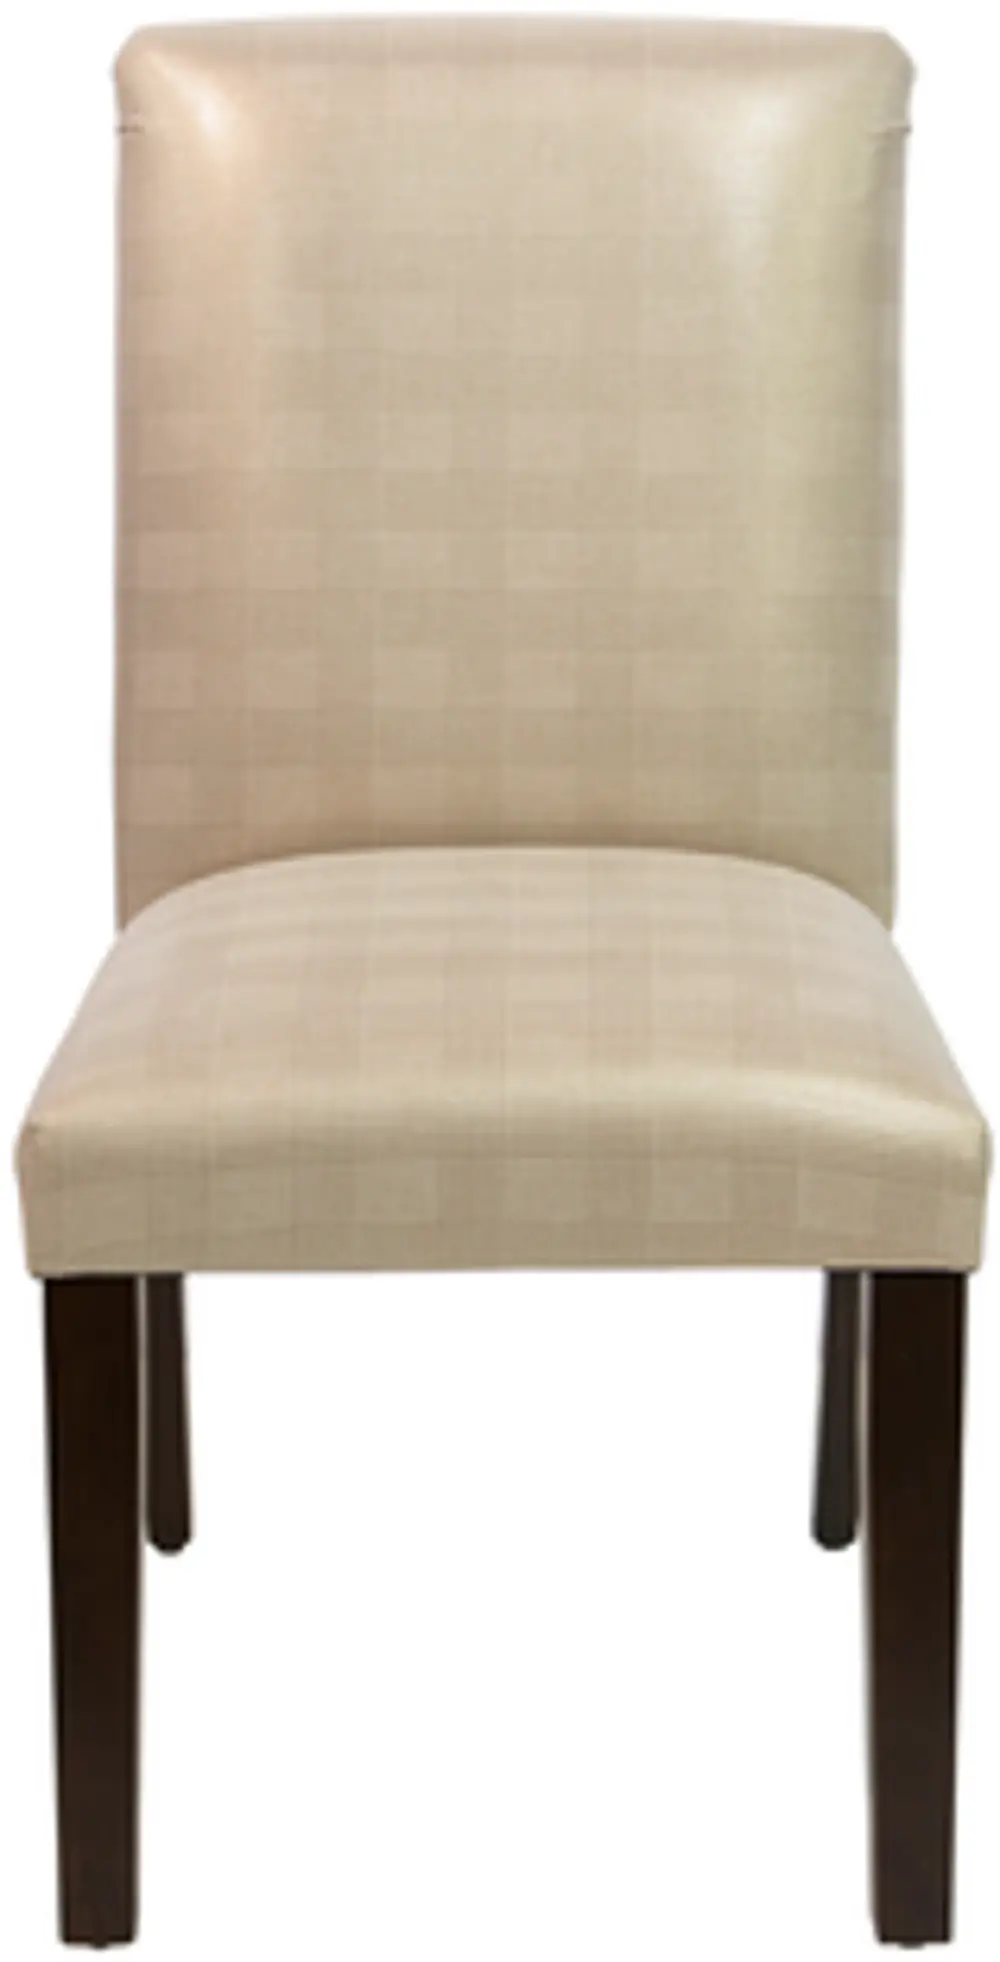 63-6PLSGLD Polished Gold Upholstered Dining Chair -1